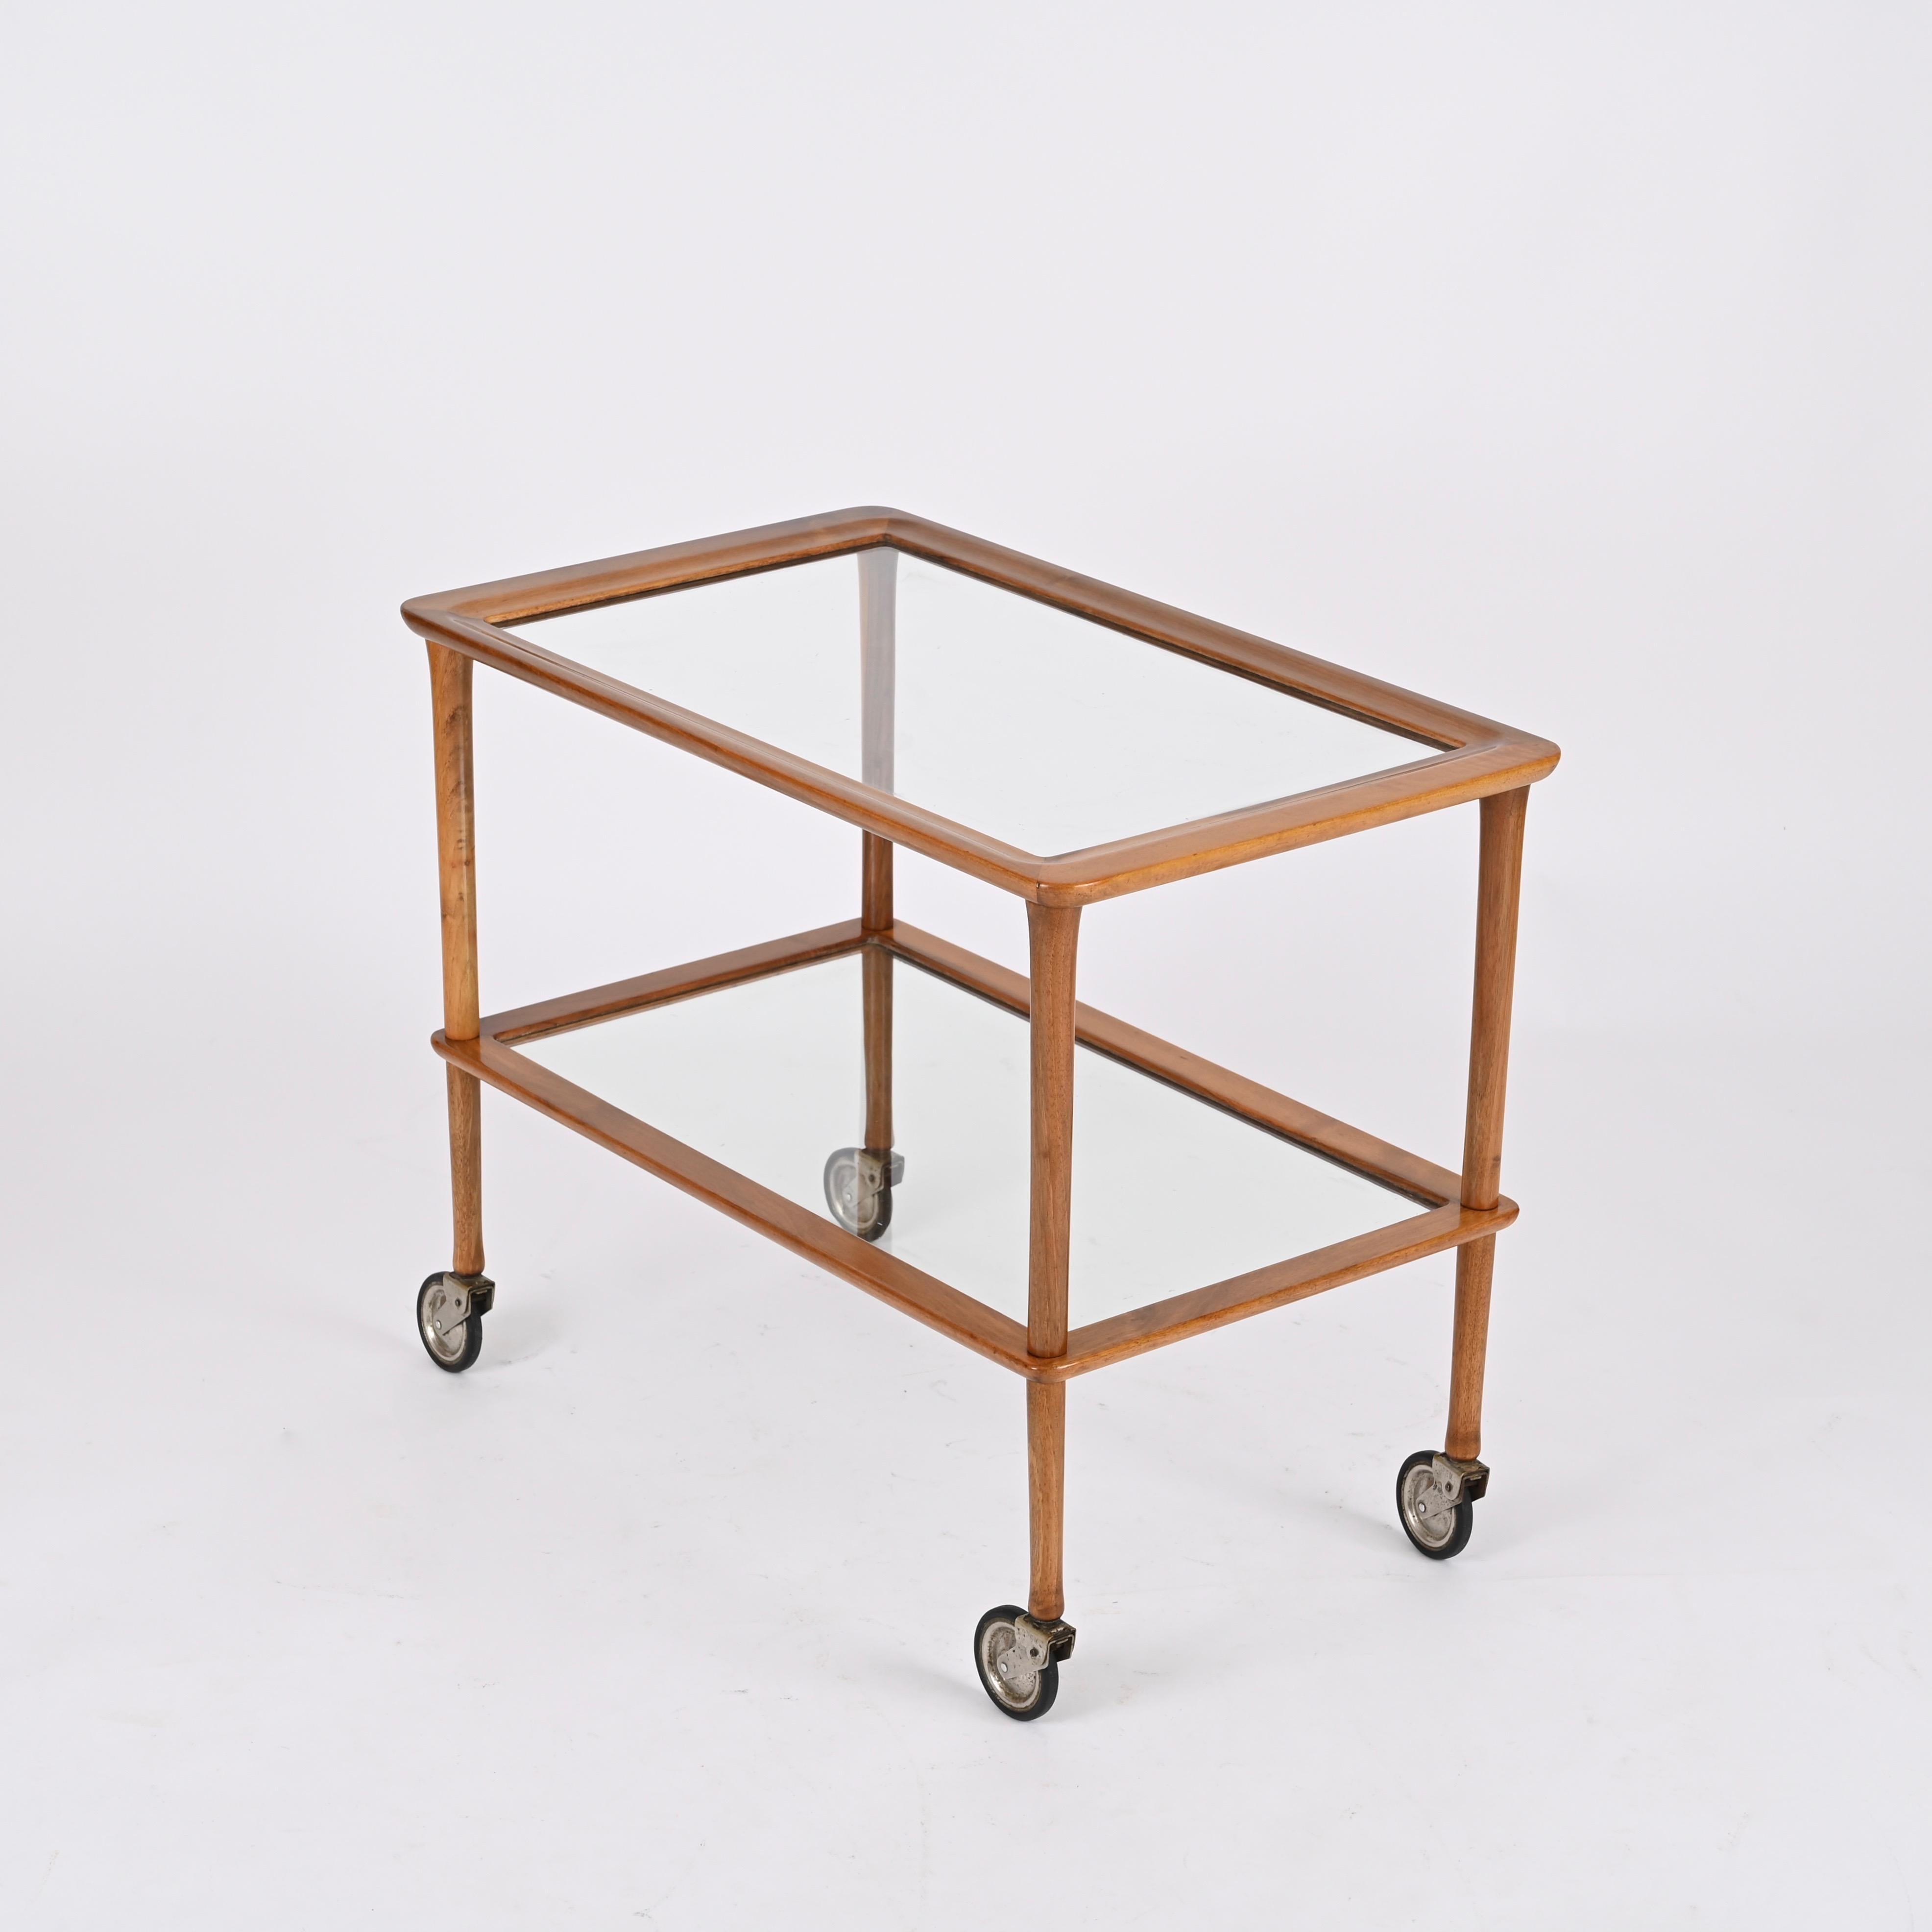 Midcentury Italian Bar Cart in Walnut and Glass, Cesare Lacca, Italy, 1960s For Sale 6